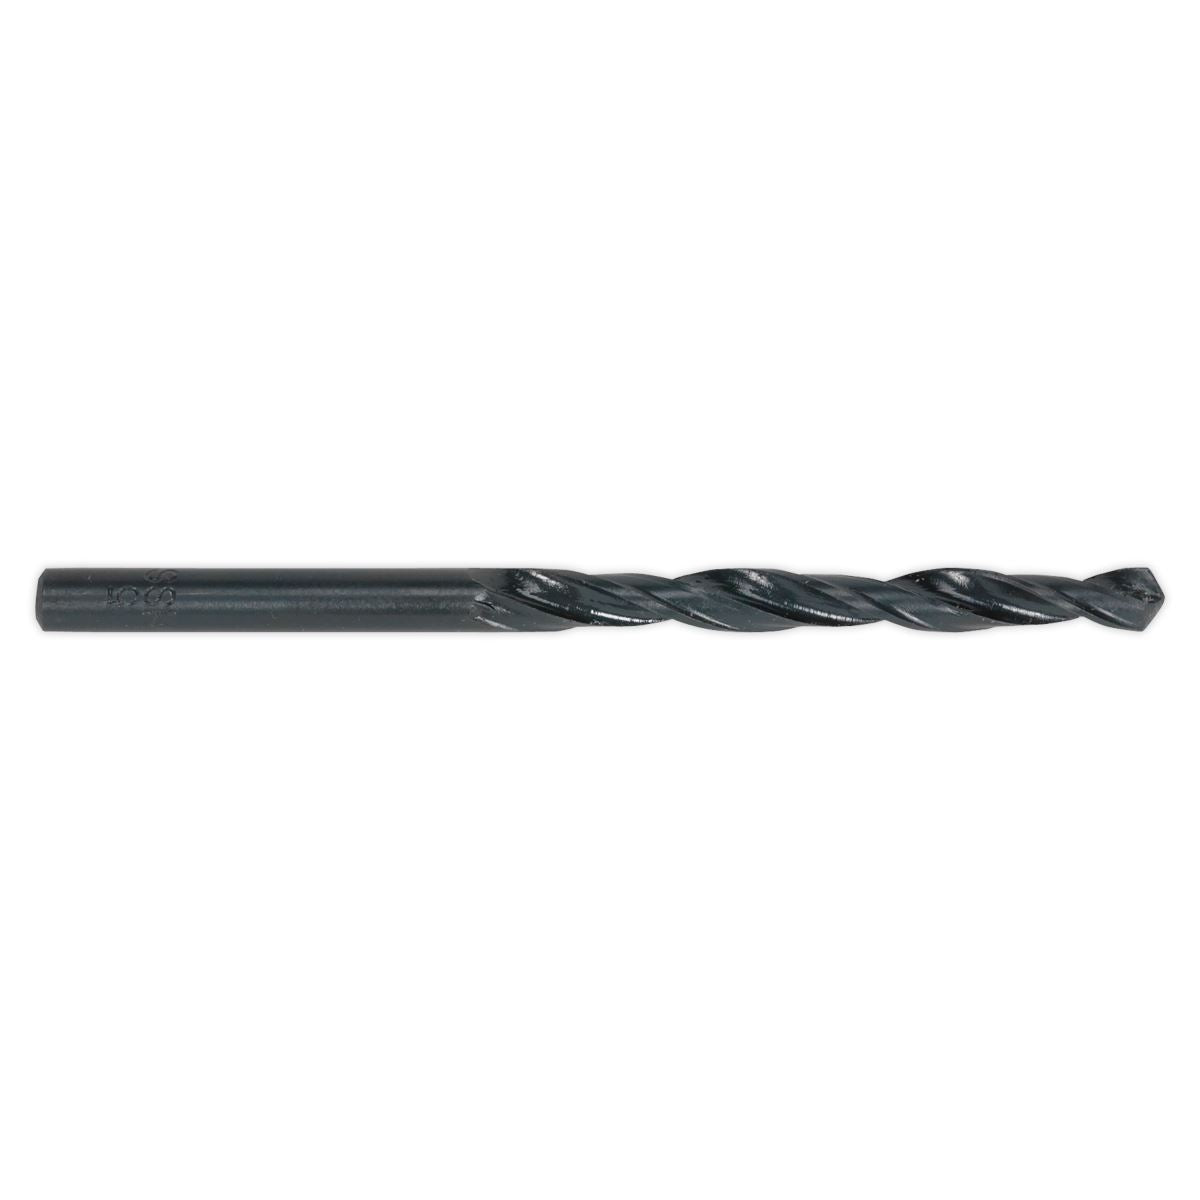 Sealey HSS Roll Forged Drill Bit Ø11mm Pack of 5